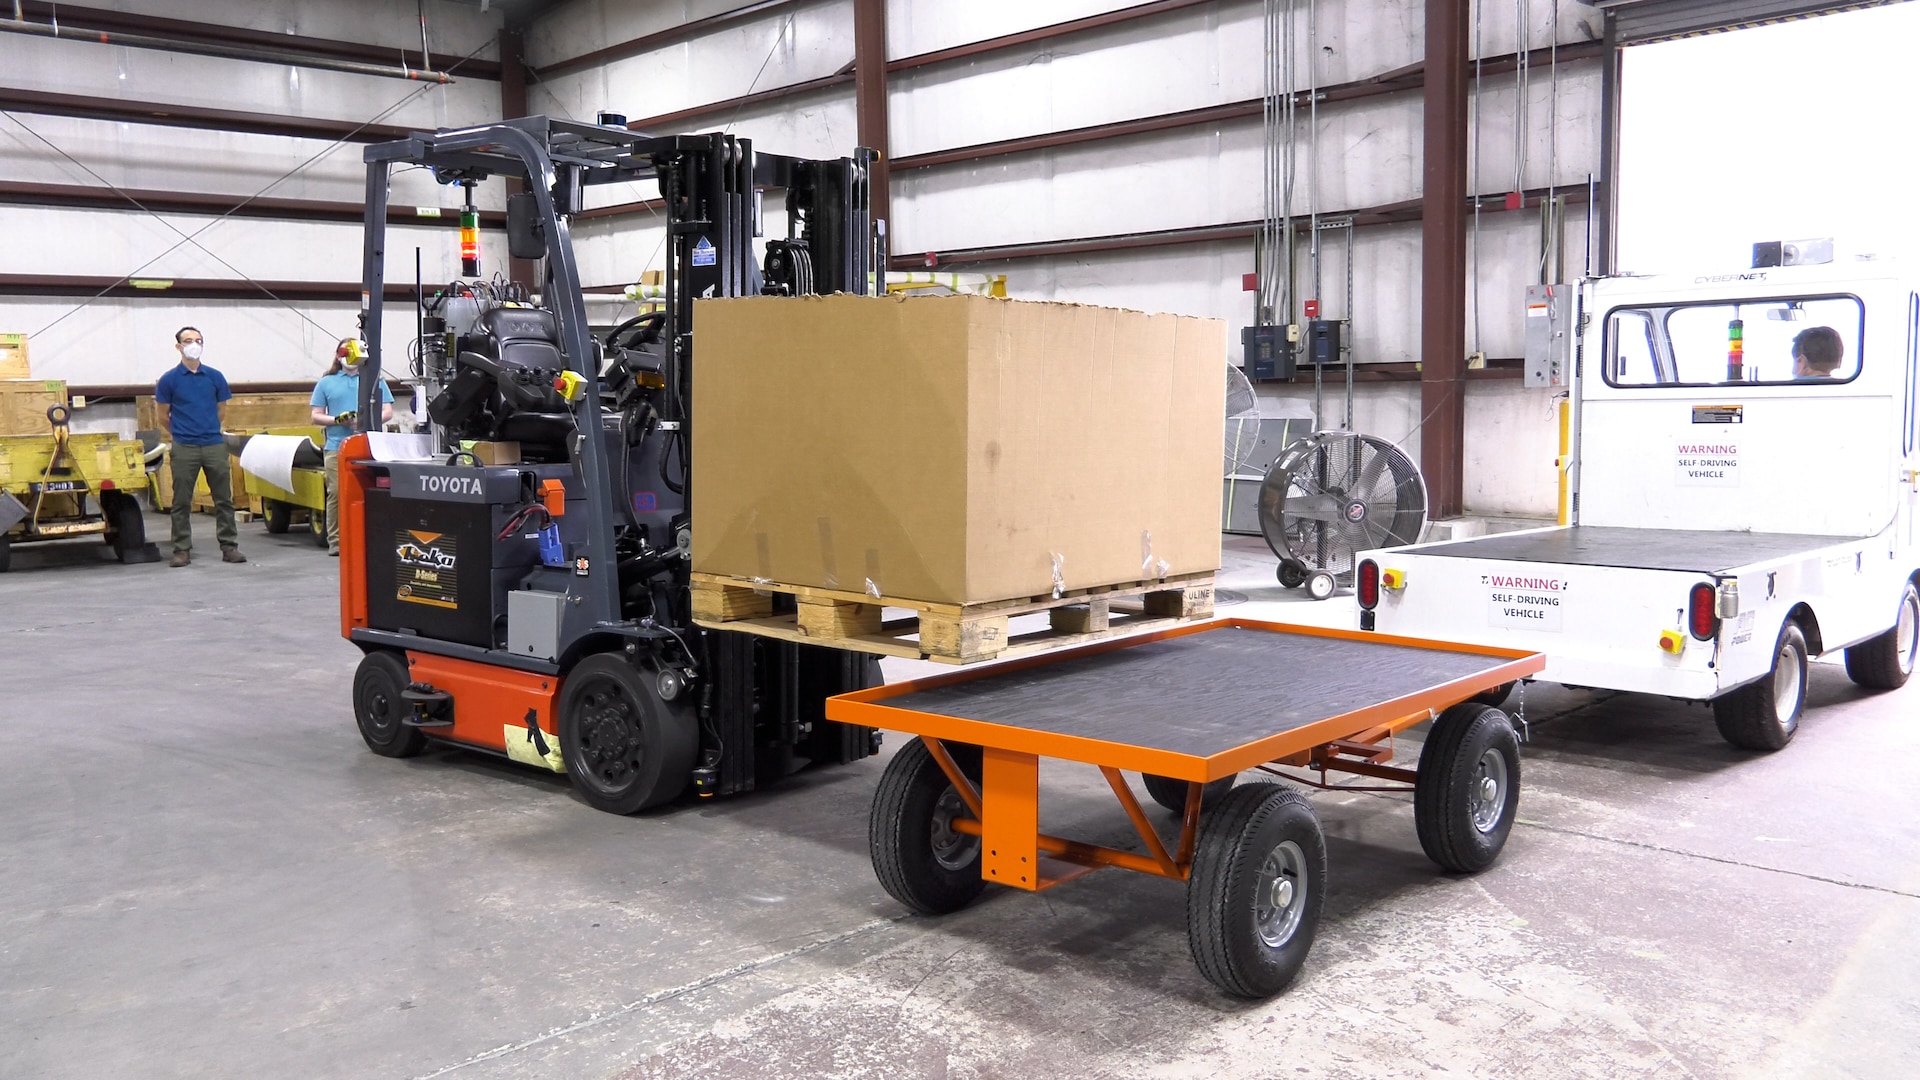 Forklift places crate on parts cart.